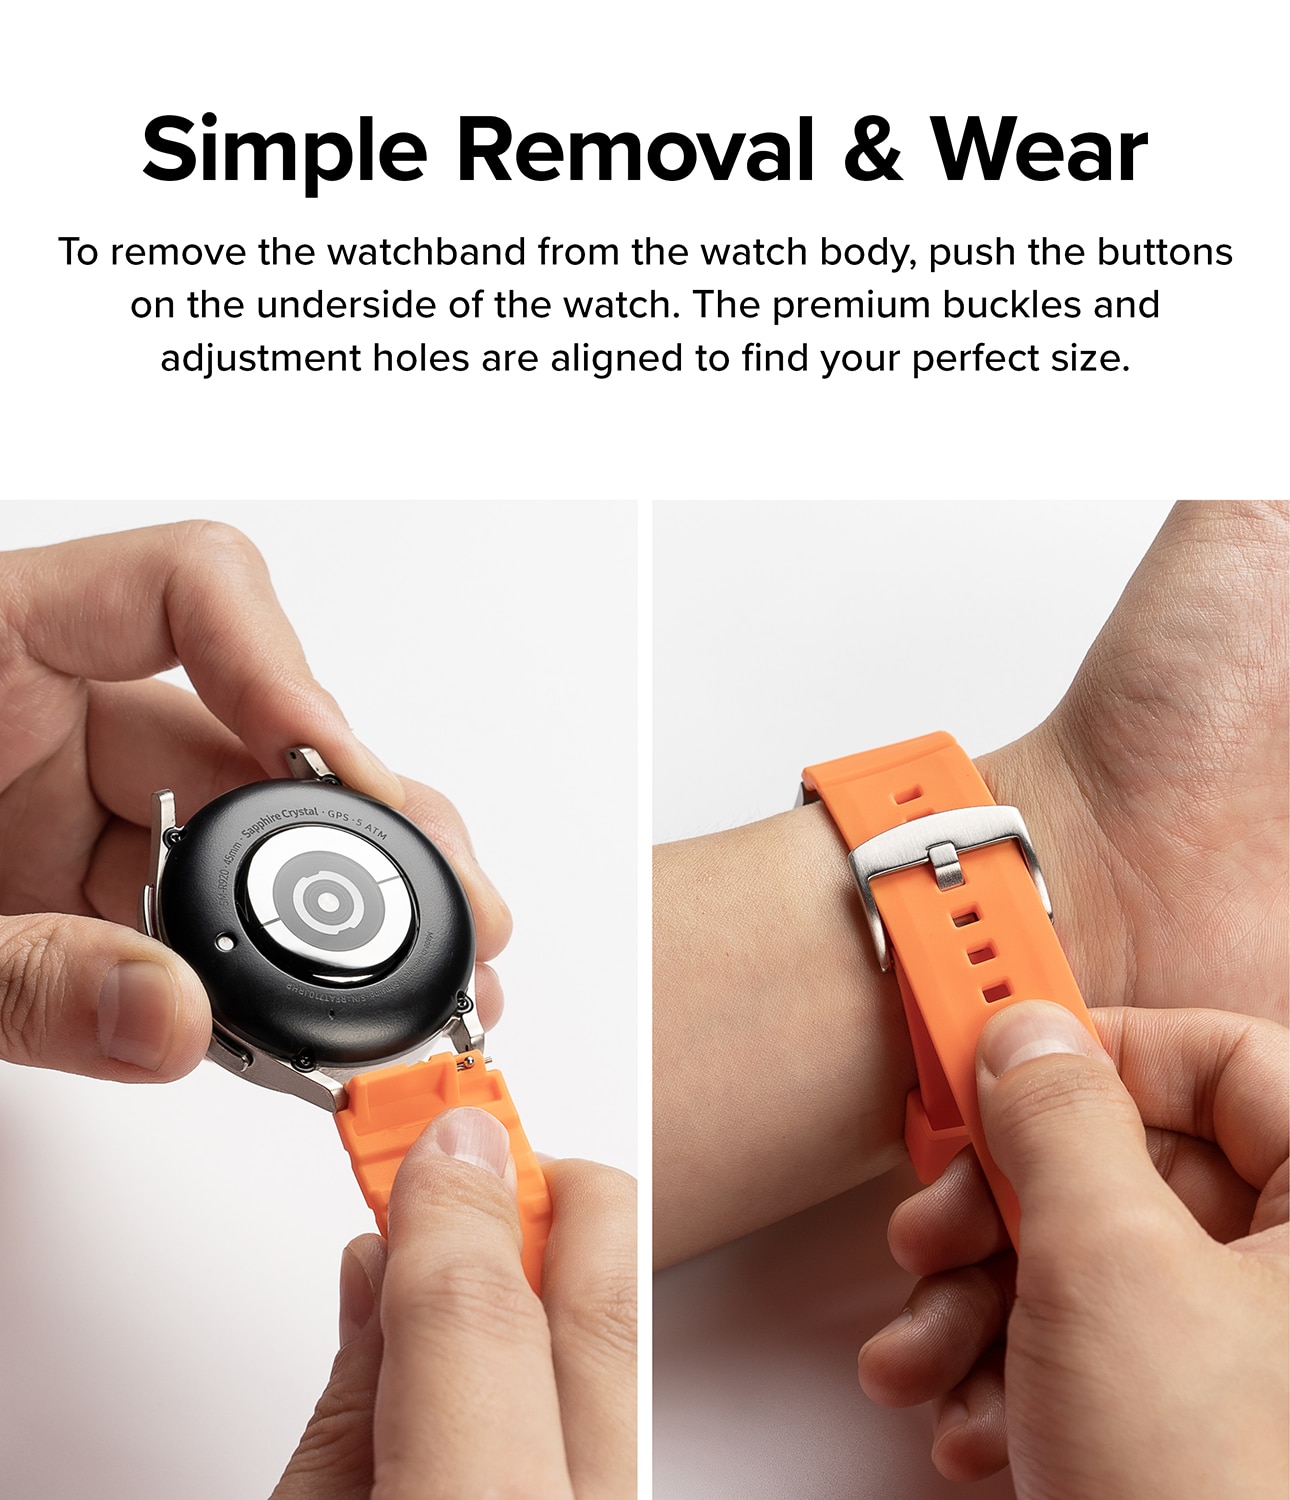 Rubber One Bold Band Withings Steel HR 40mm Orange